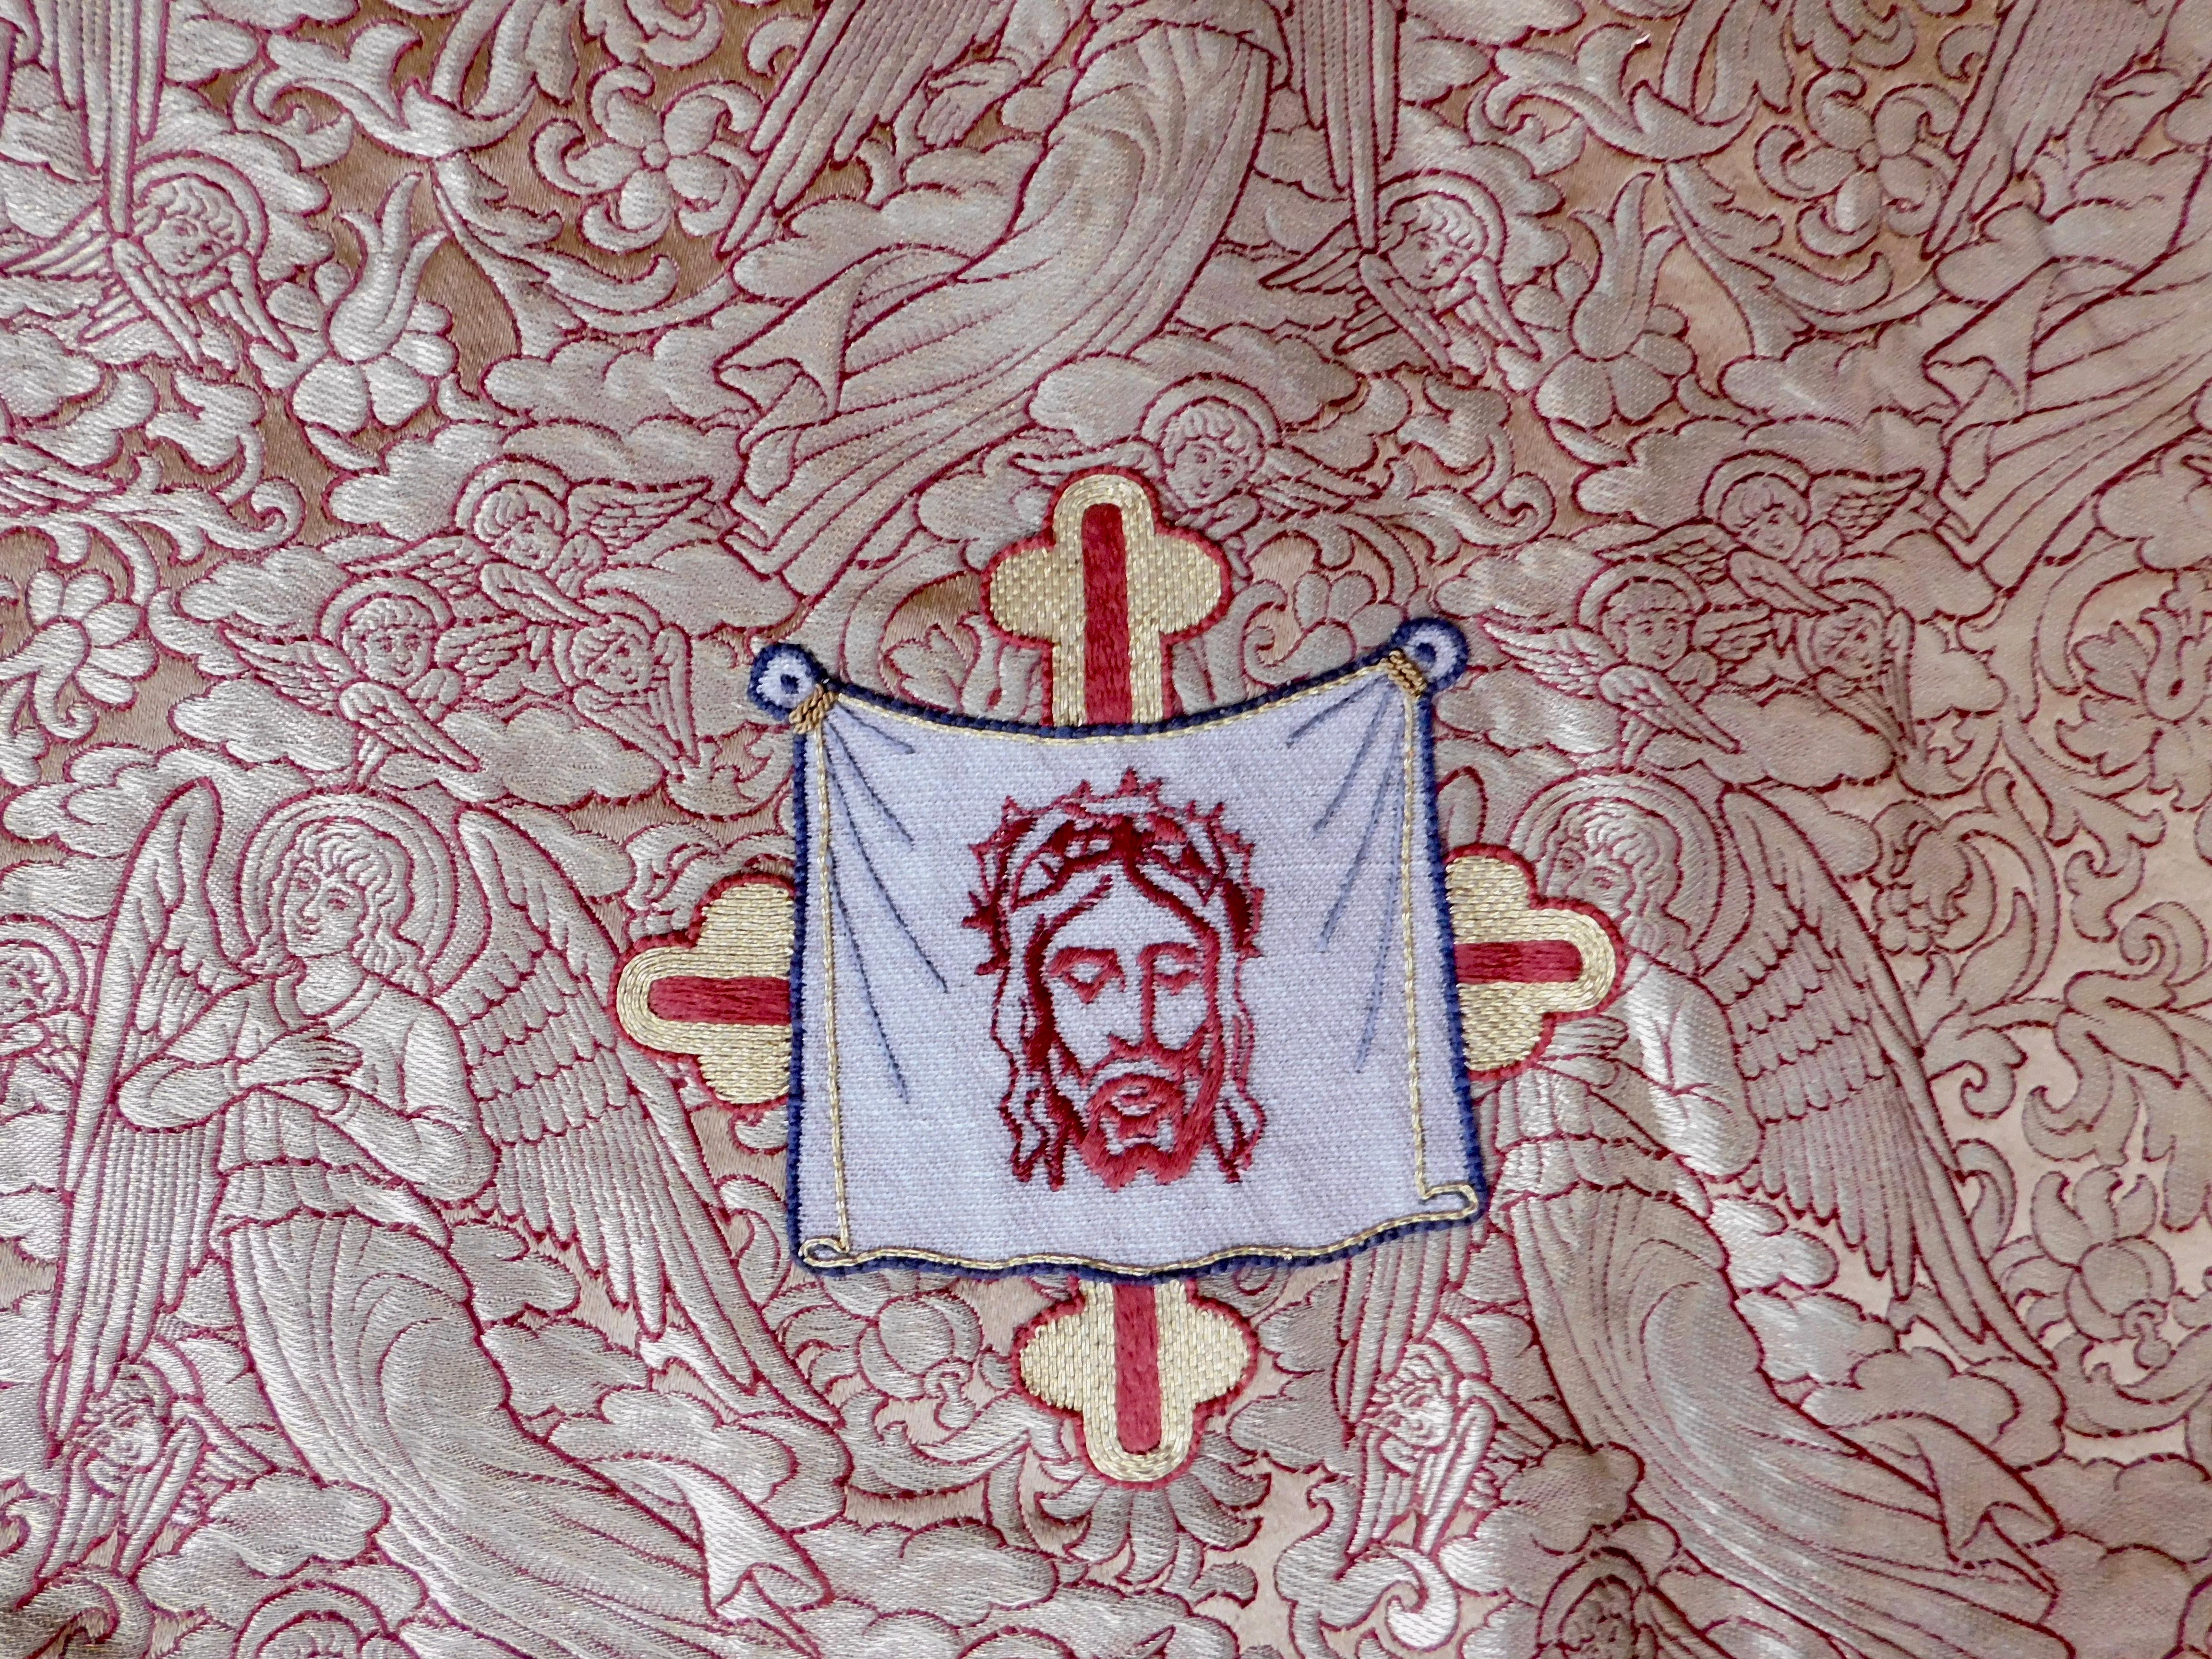 This Chalice veil is woven in metallic gold brocade with a central applique depicting Jesus during the Crucifixion . In good condition and easily made into a pillow cover.

Chalice Veil definition:
A square of material that covers the chalice and